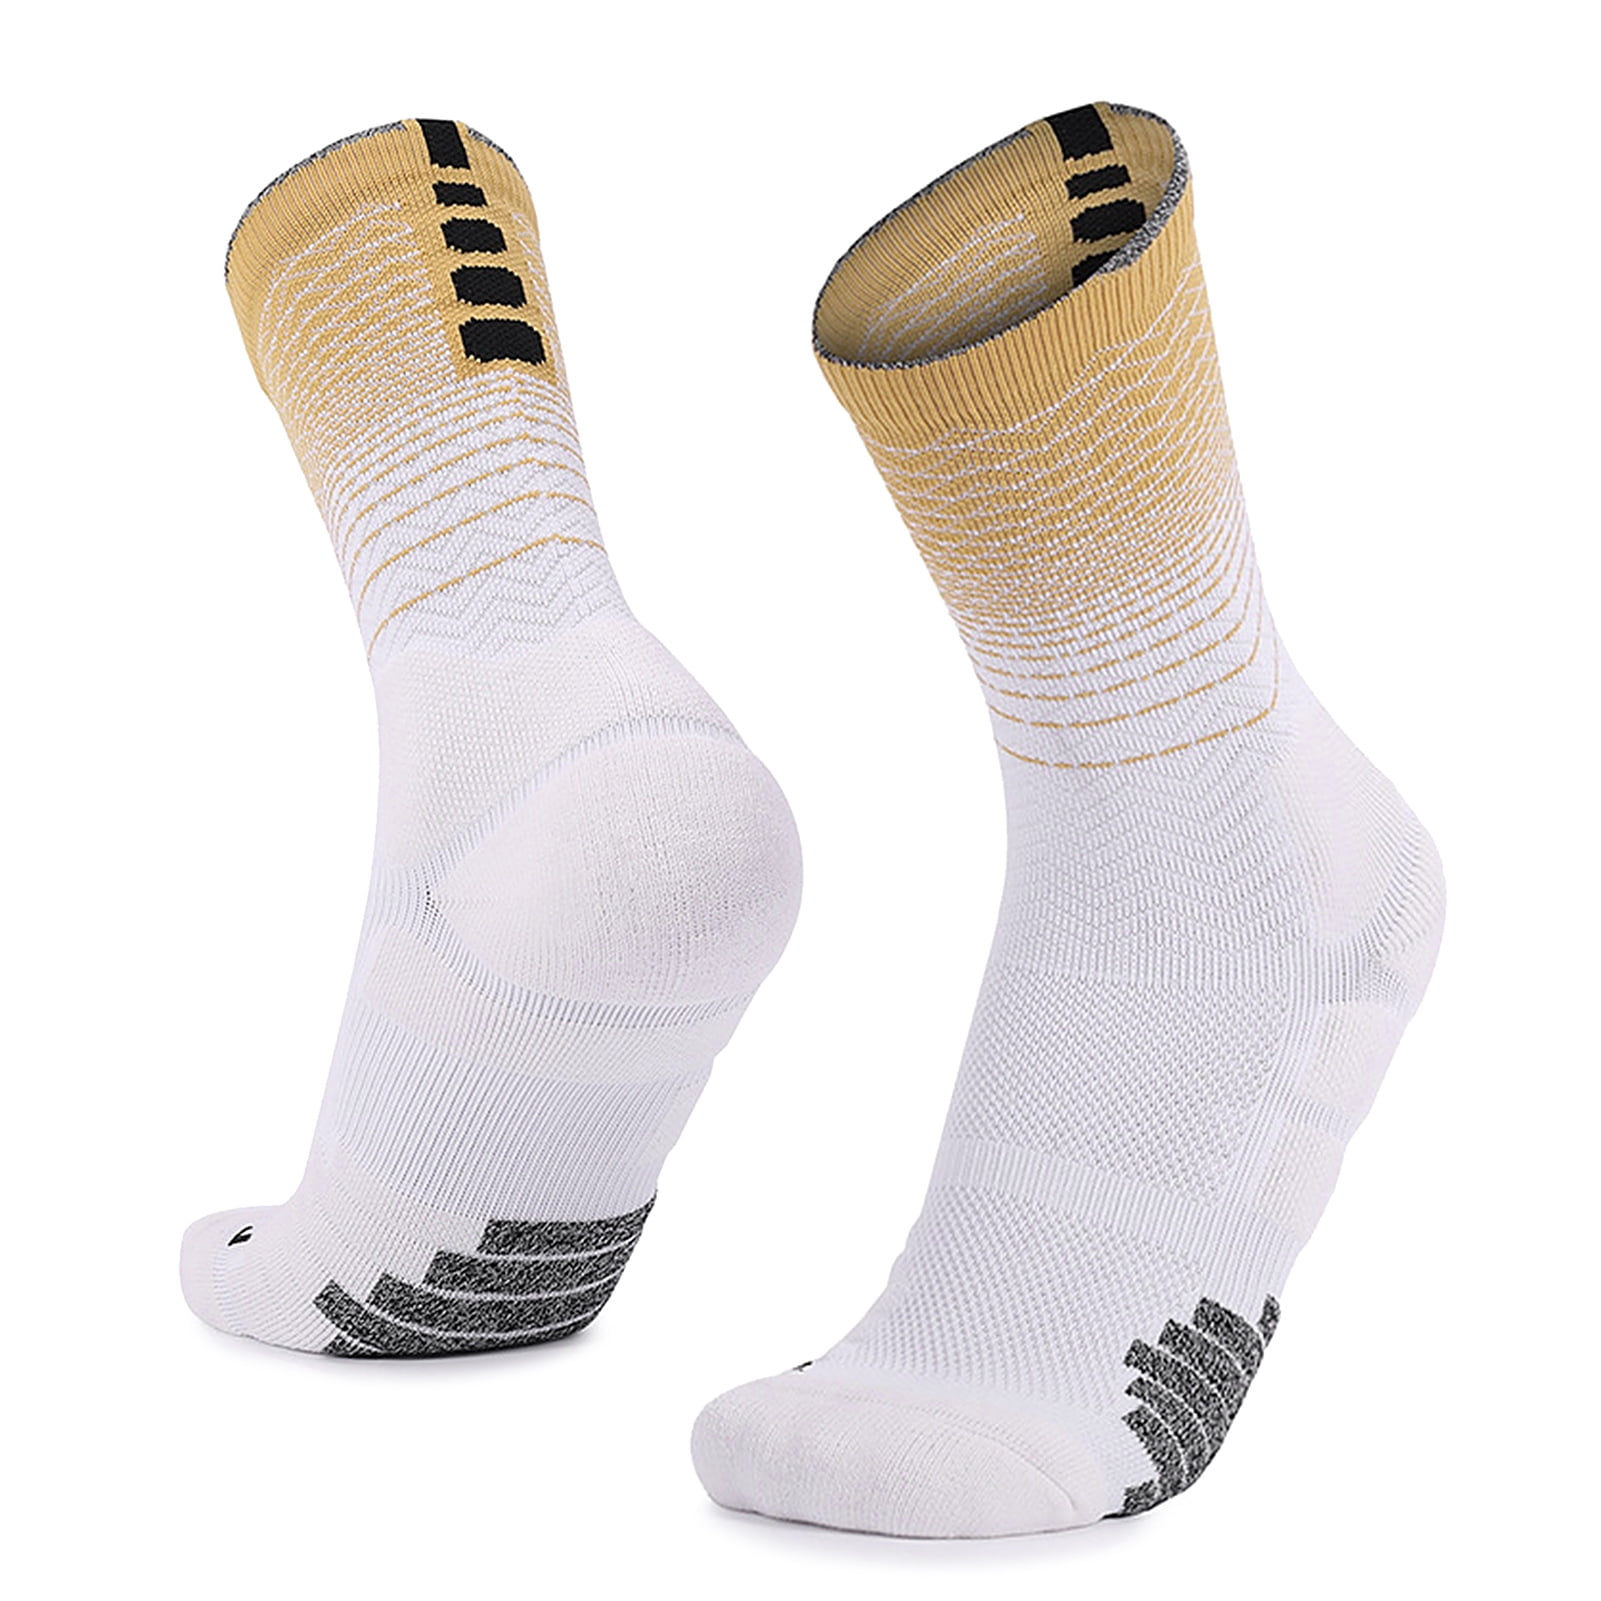 Athletic Basketball Socks Compression Breathable Cushioned Soccer Sports Crew Socks for Men Youth Boys 